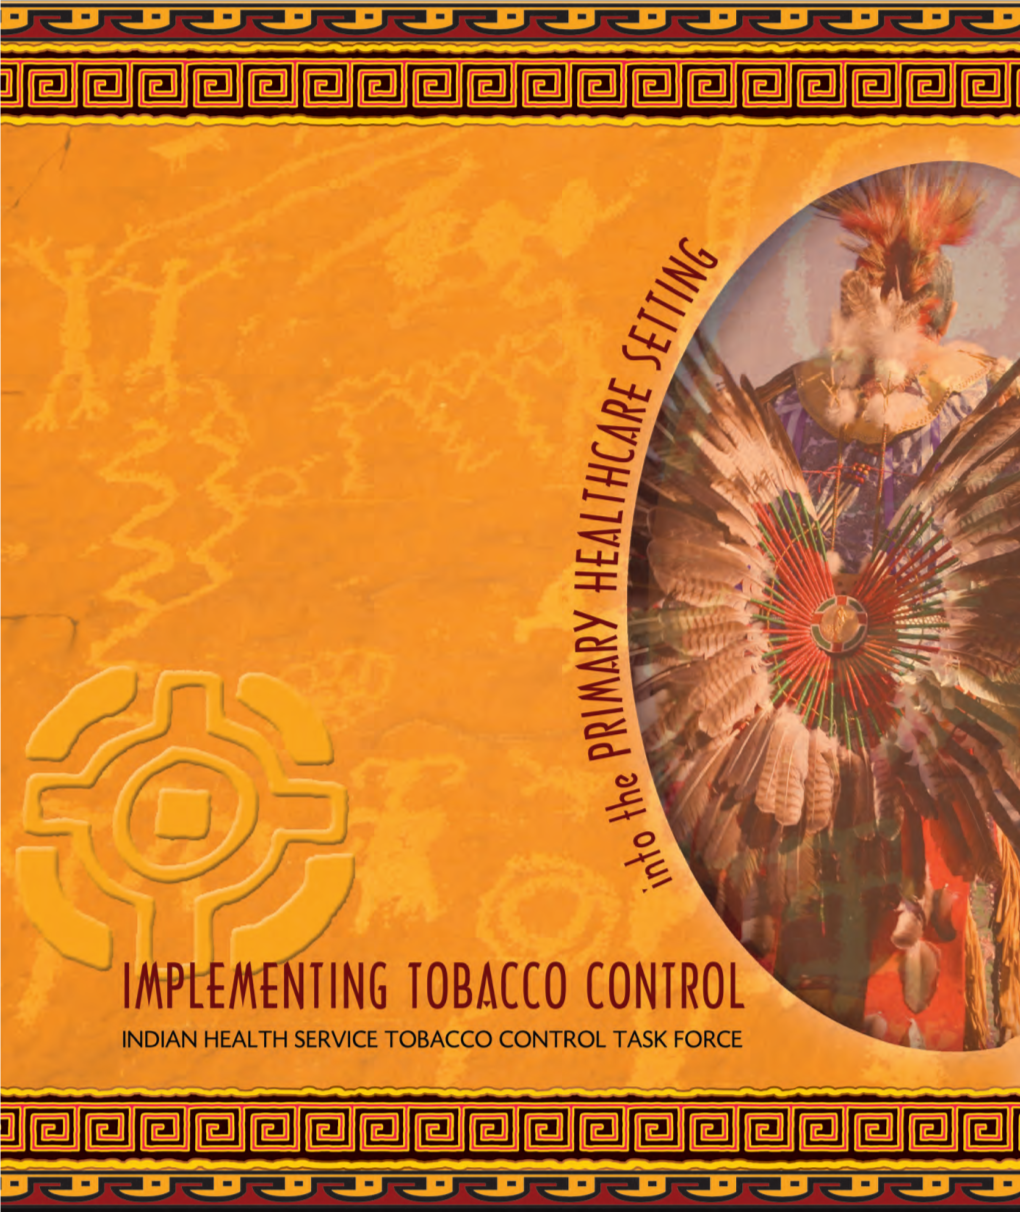 The Indian Health Service Tobacco Control